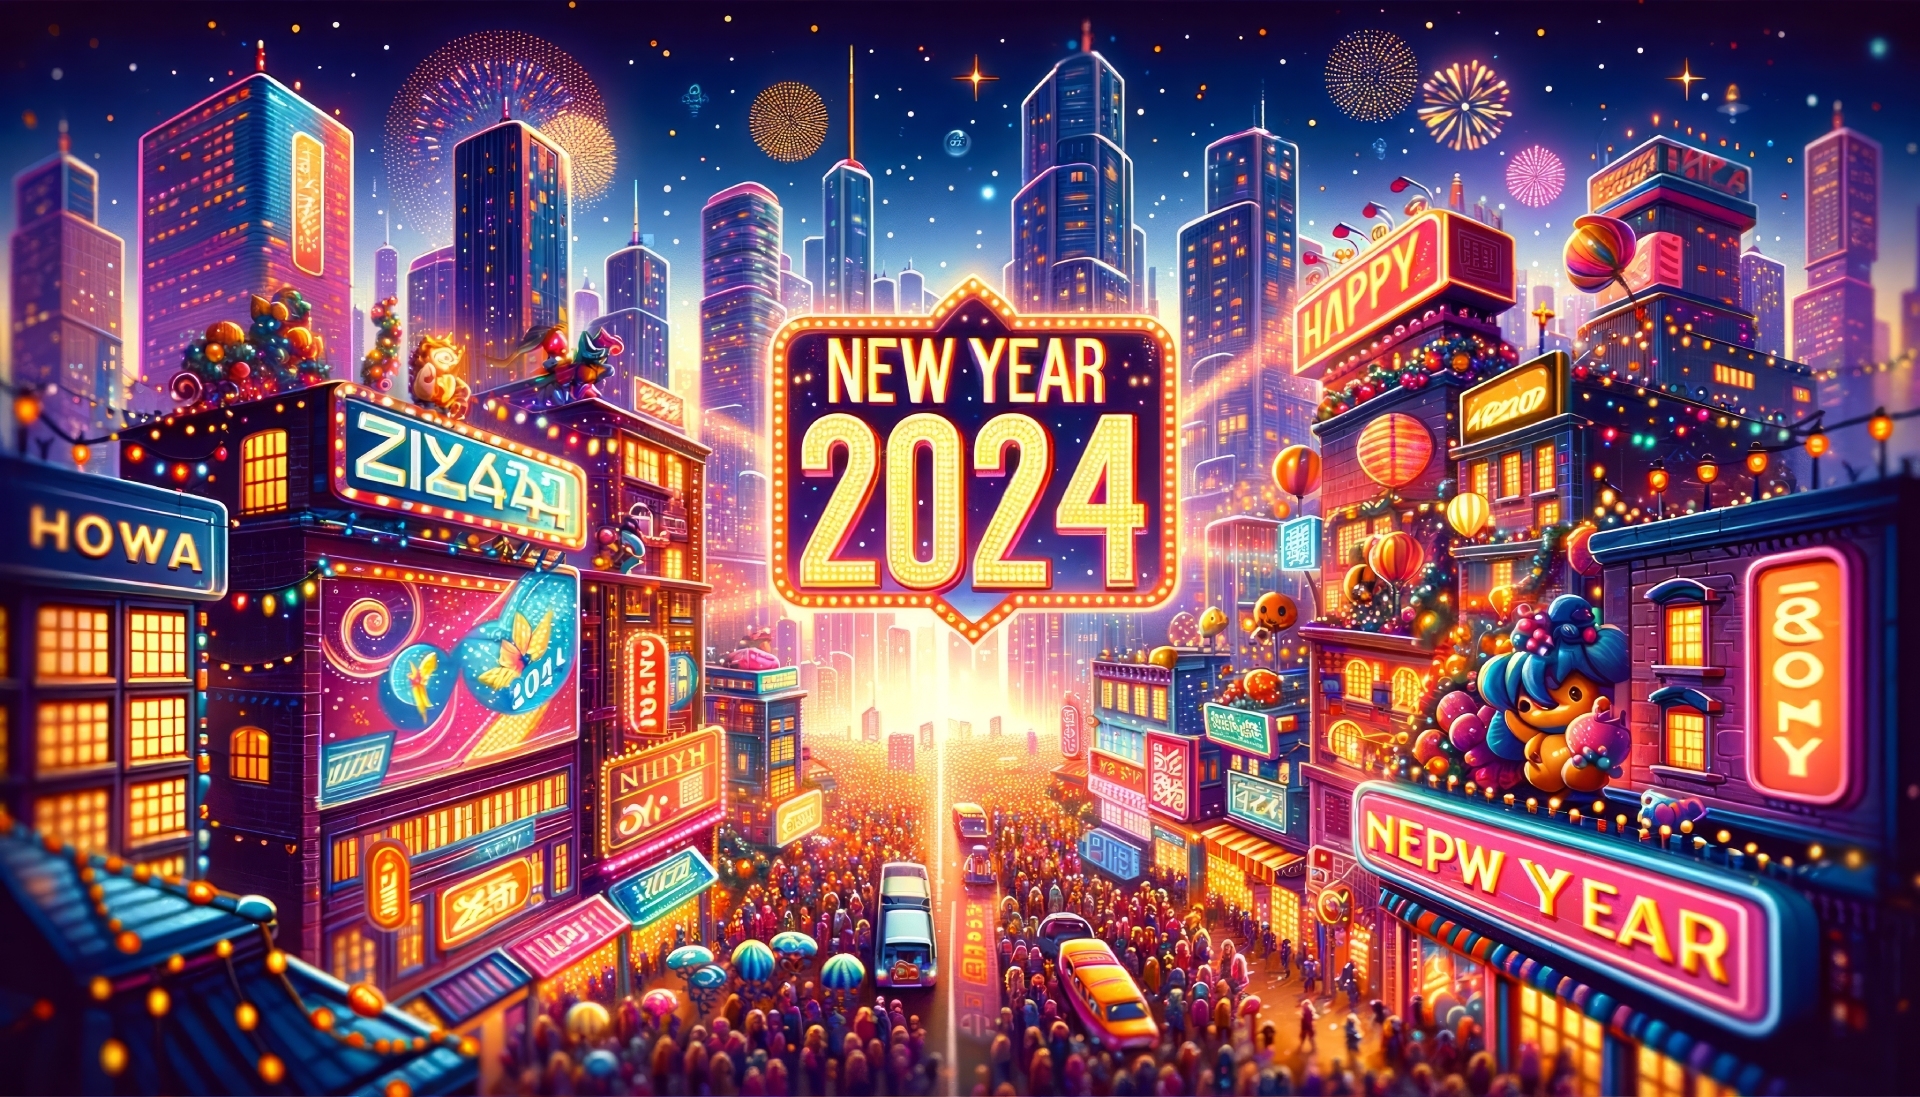 Happy New Year 2024 Wallpaper, HD Holidays 4K Wallpapers, Images and